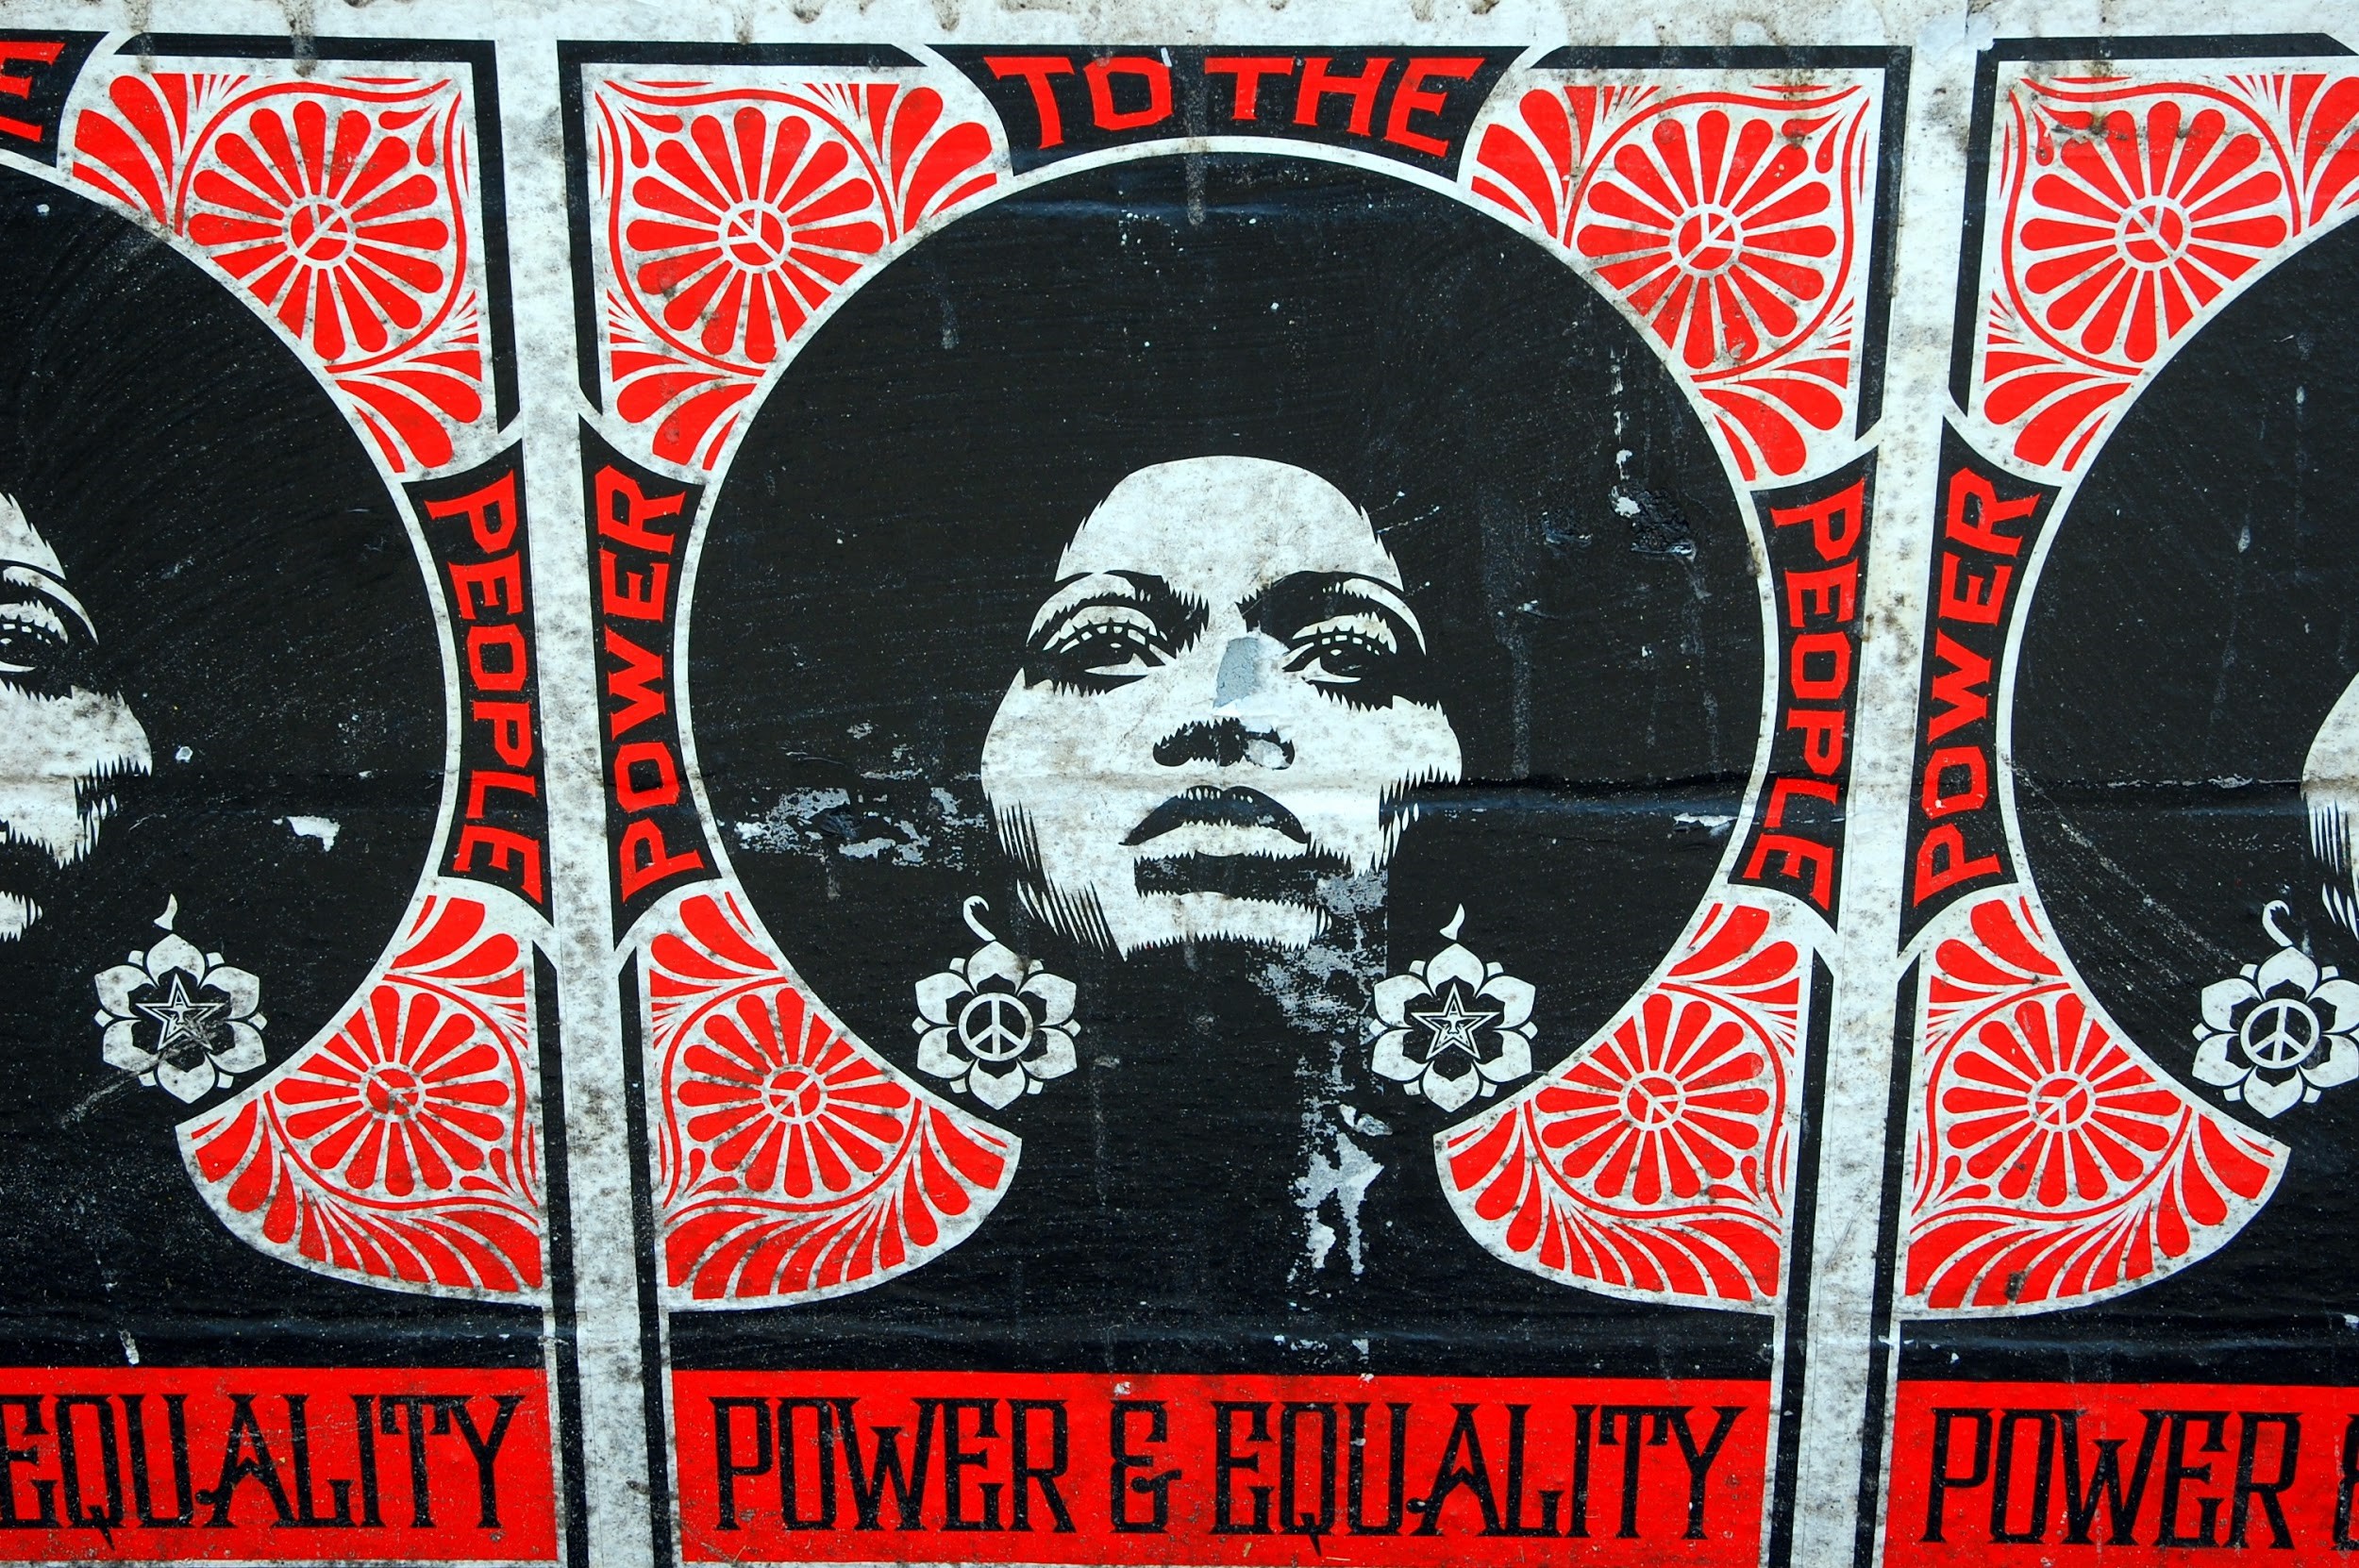 Black, white and red posters promoting Black women.